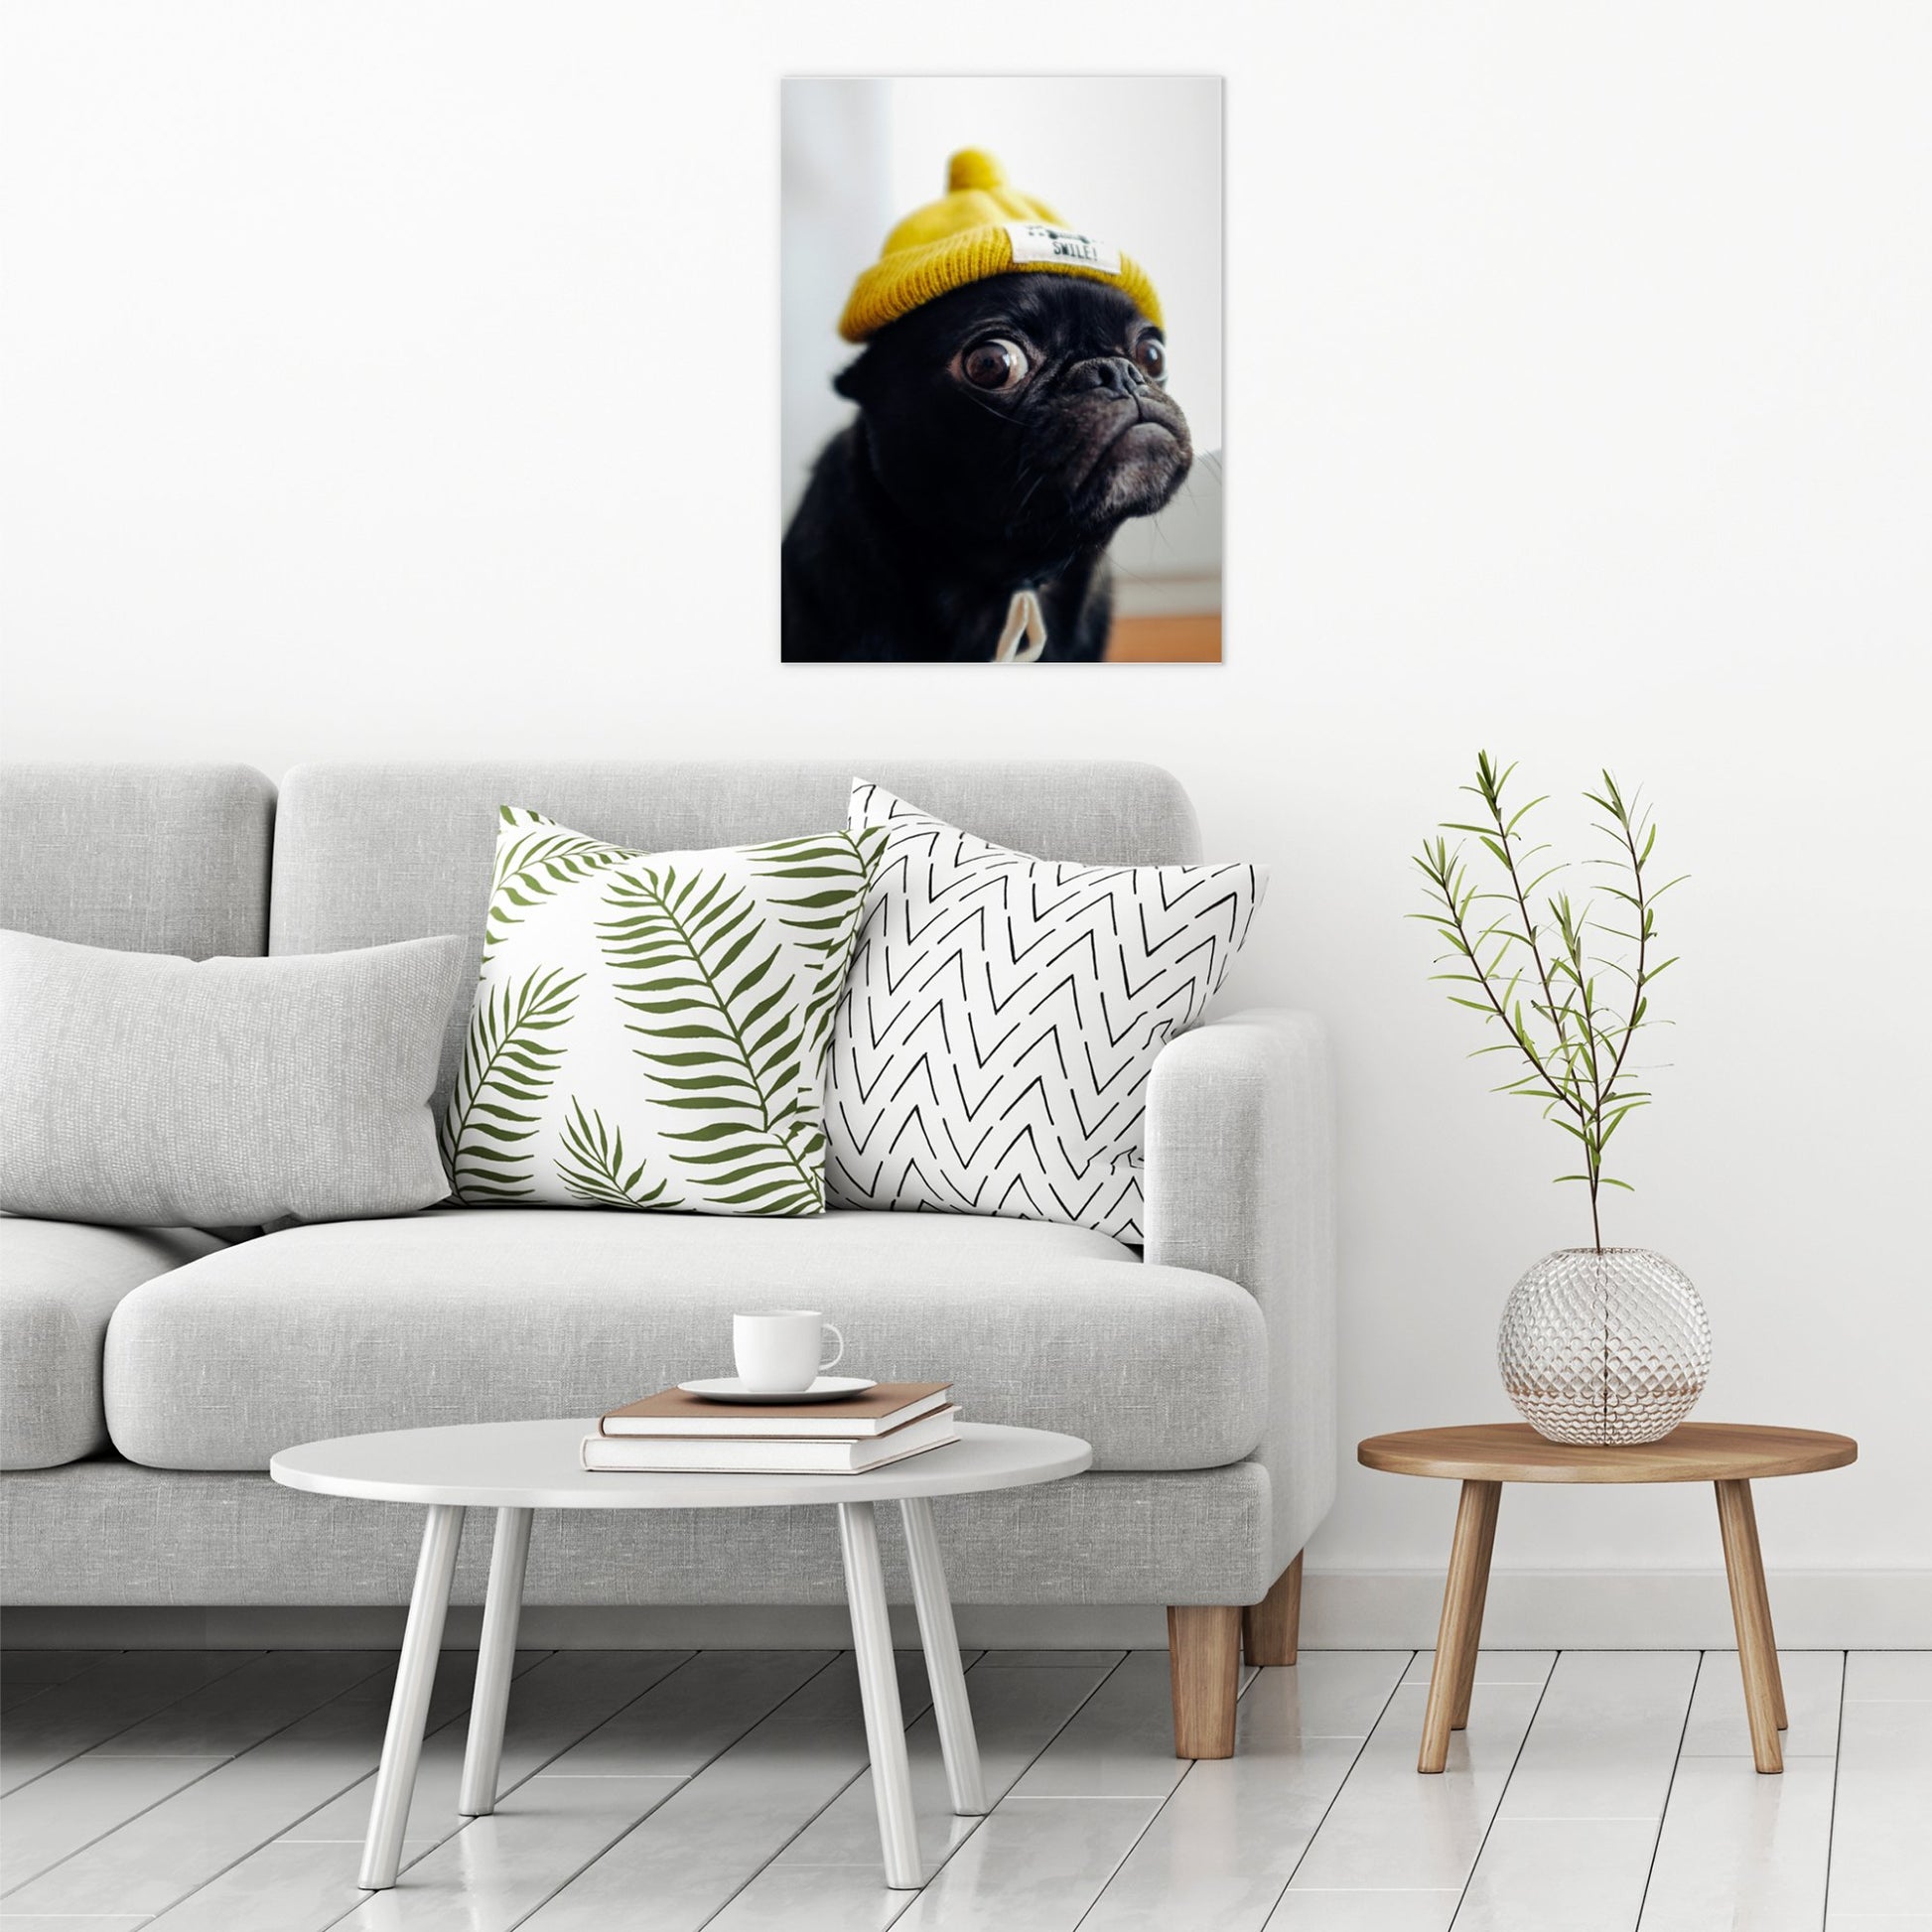 A contemporary modern room view showing a large size metal art poster display plate with printed design of a Pug in a Yellow Hat